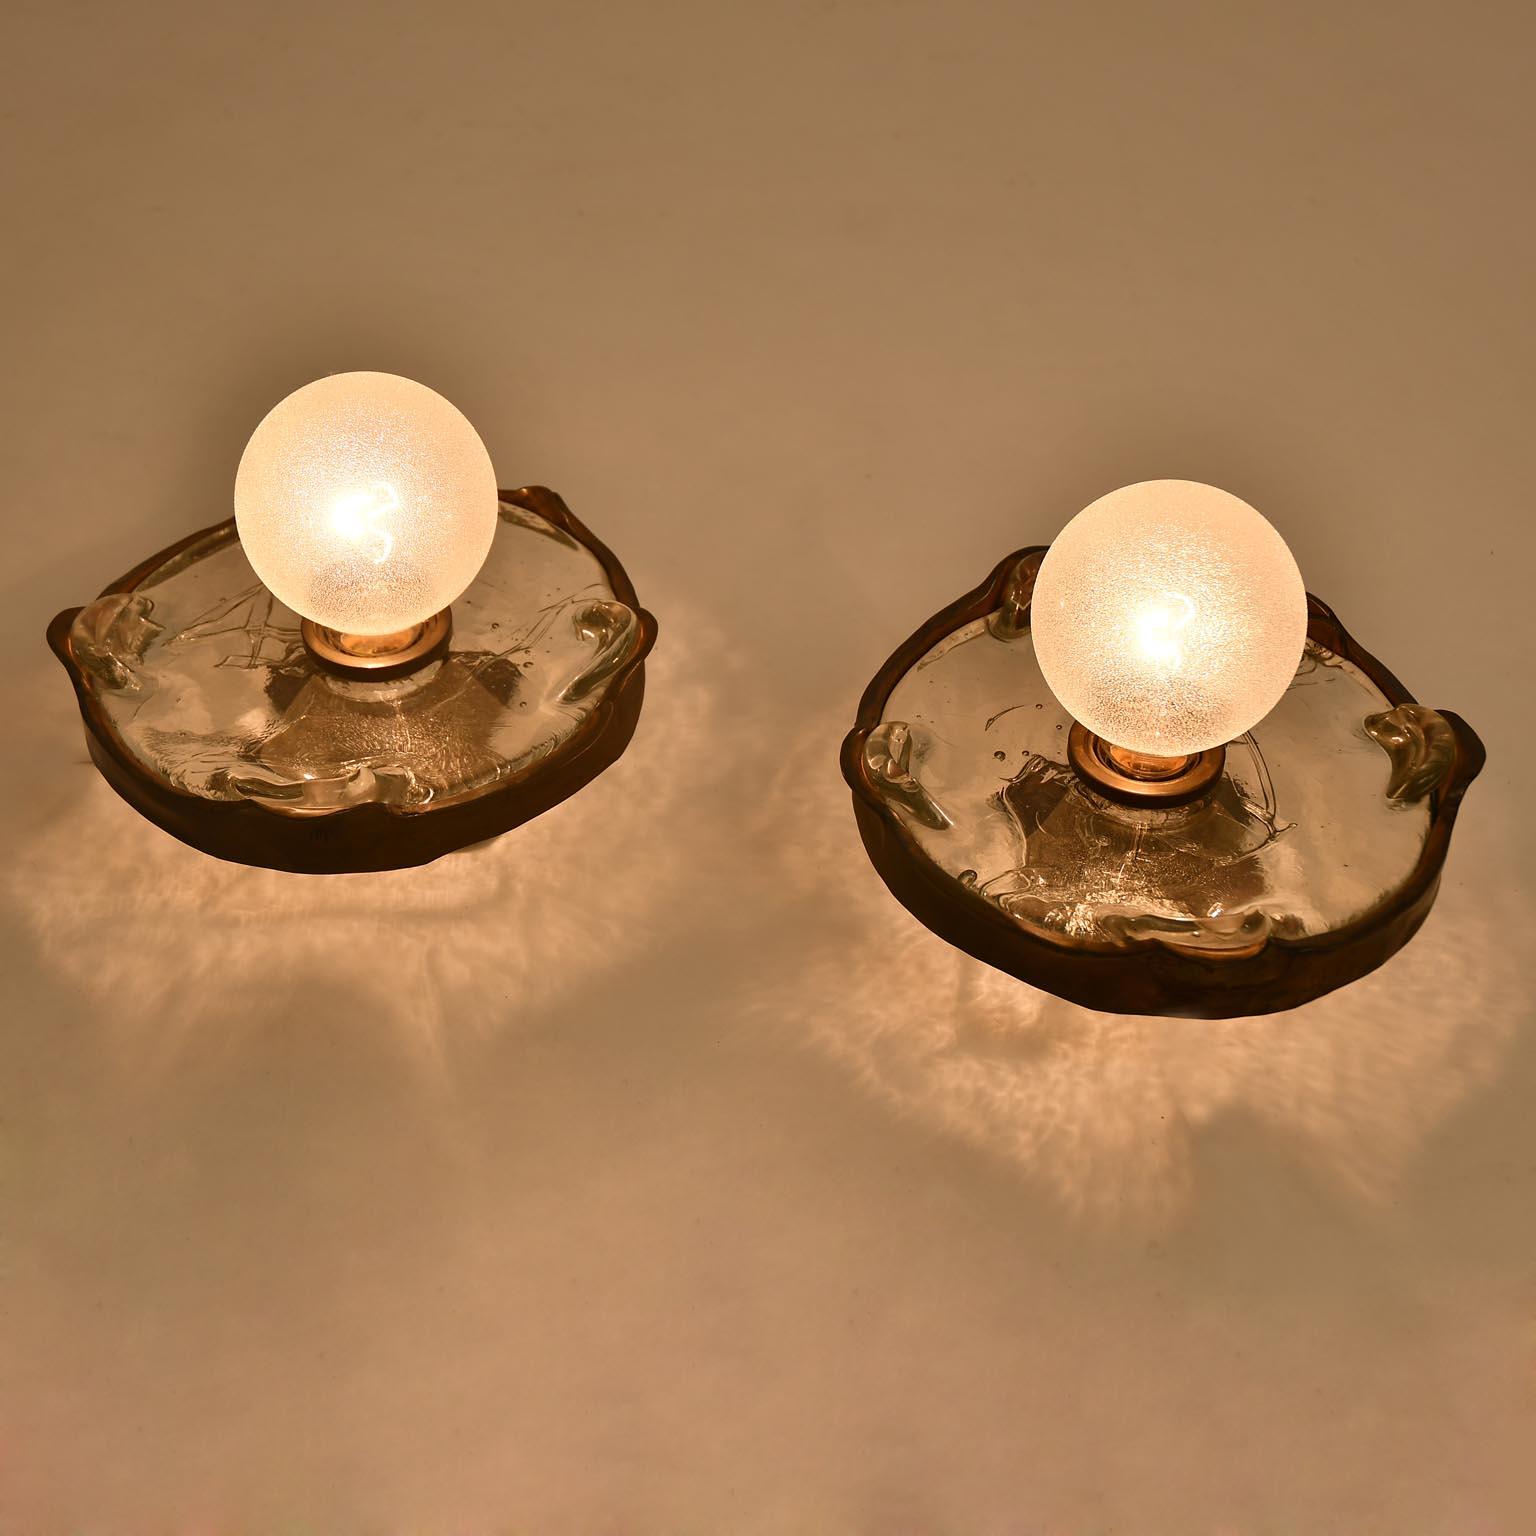 Brutalist Set of Mirrow and Wall Lights, Bronce Glass Lothar Klute Signed, 1980s For Sale 5